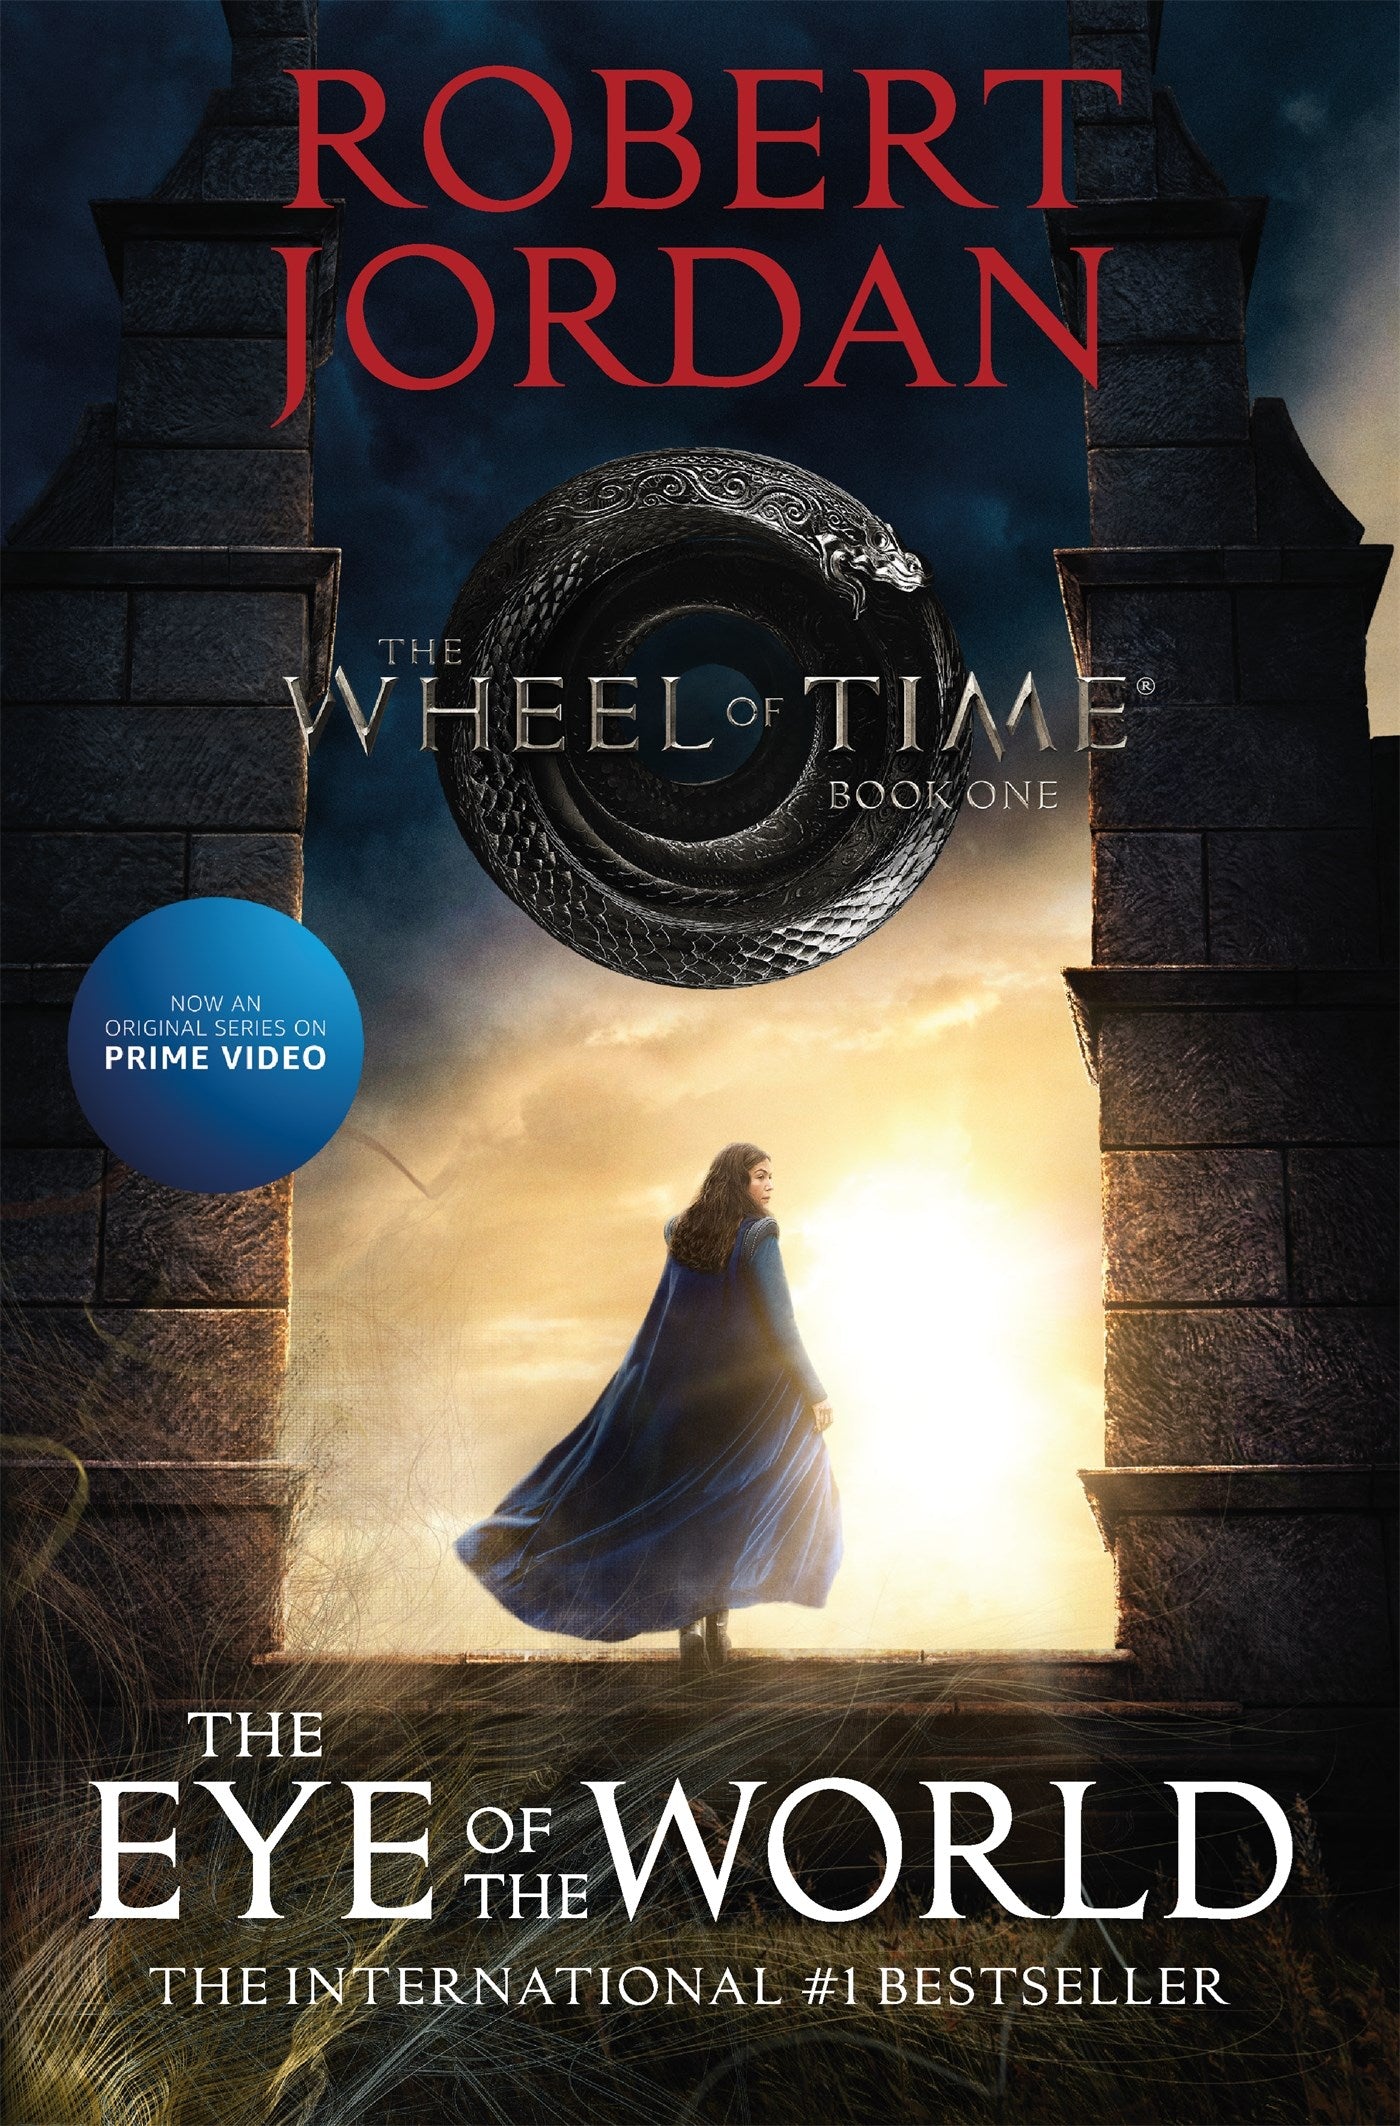 The Eye of the World: Book One of The Wheel of Time (Media tie-in)